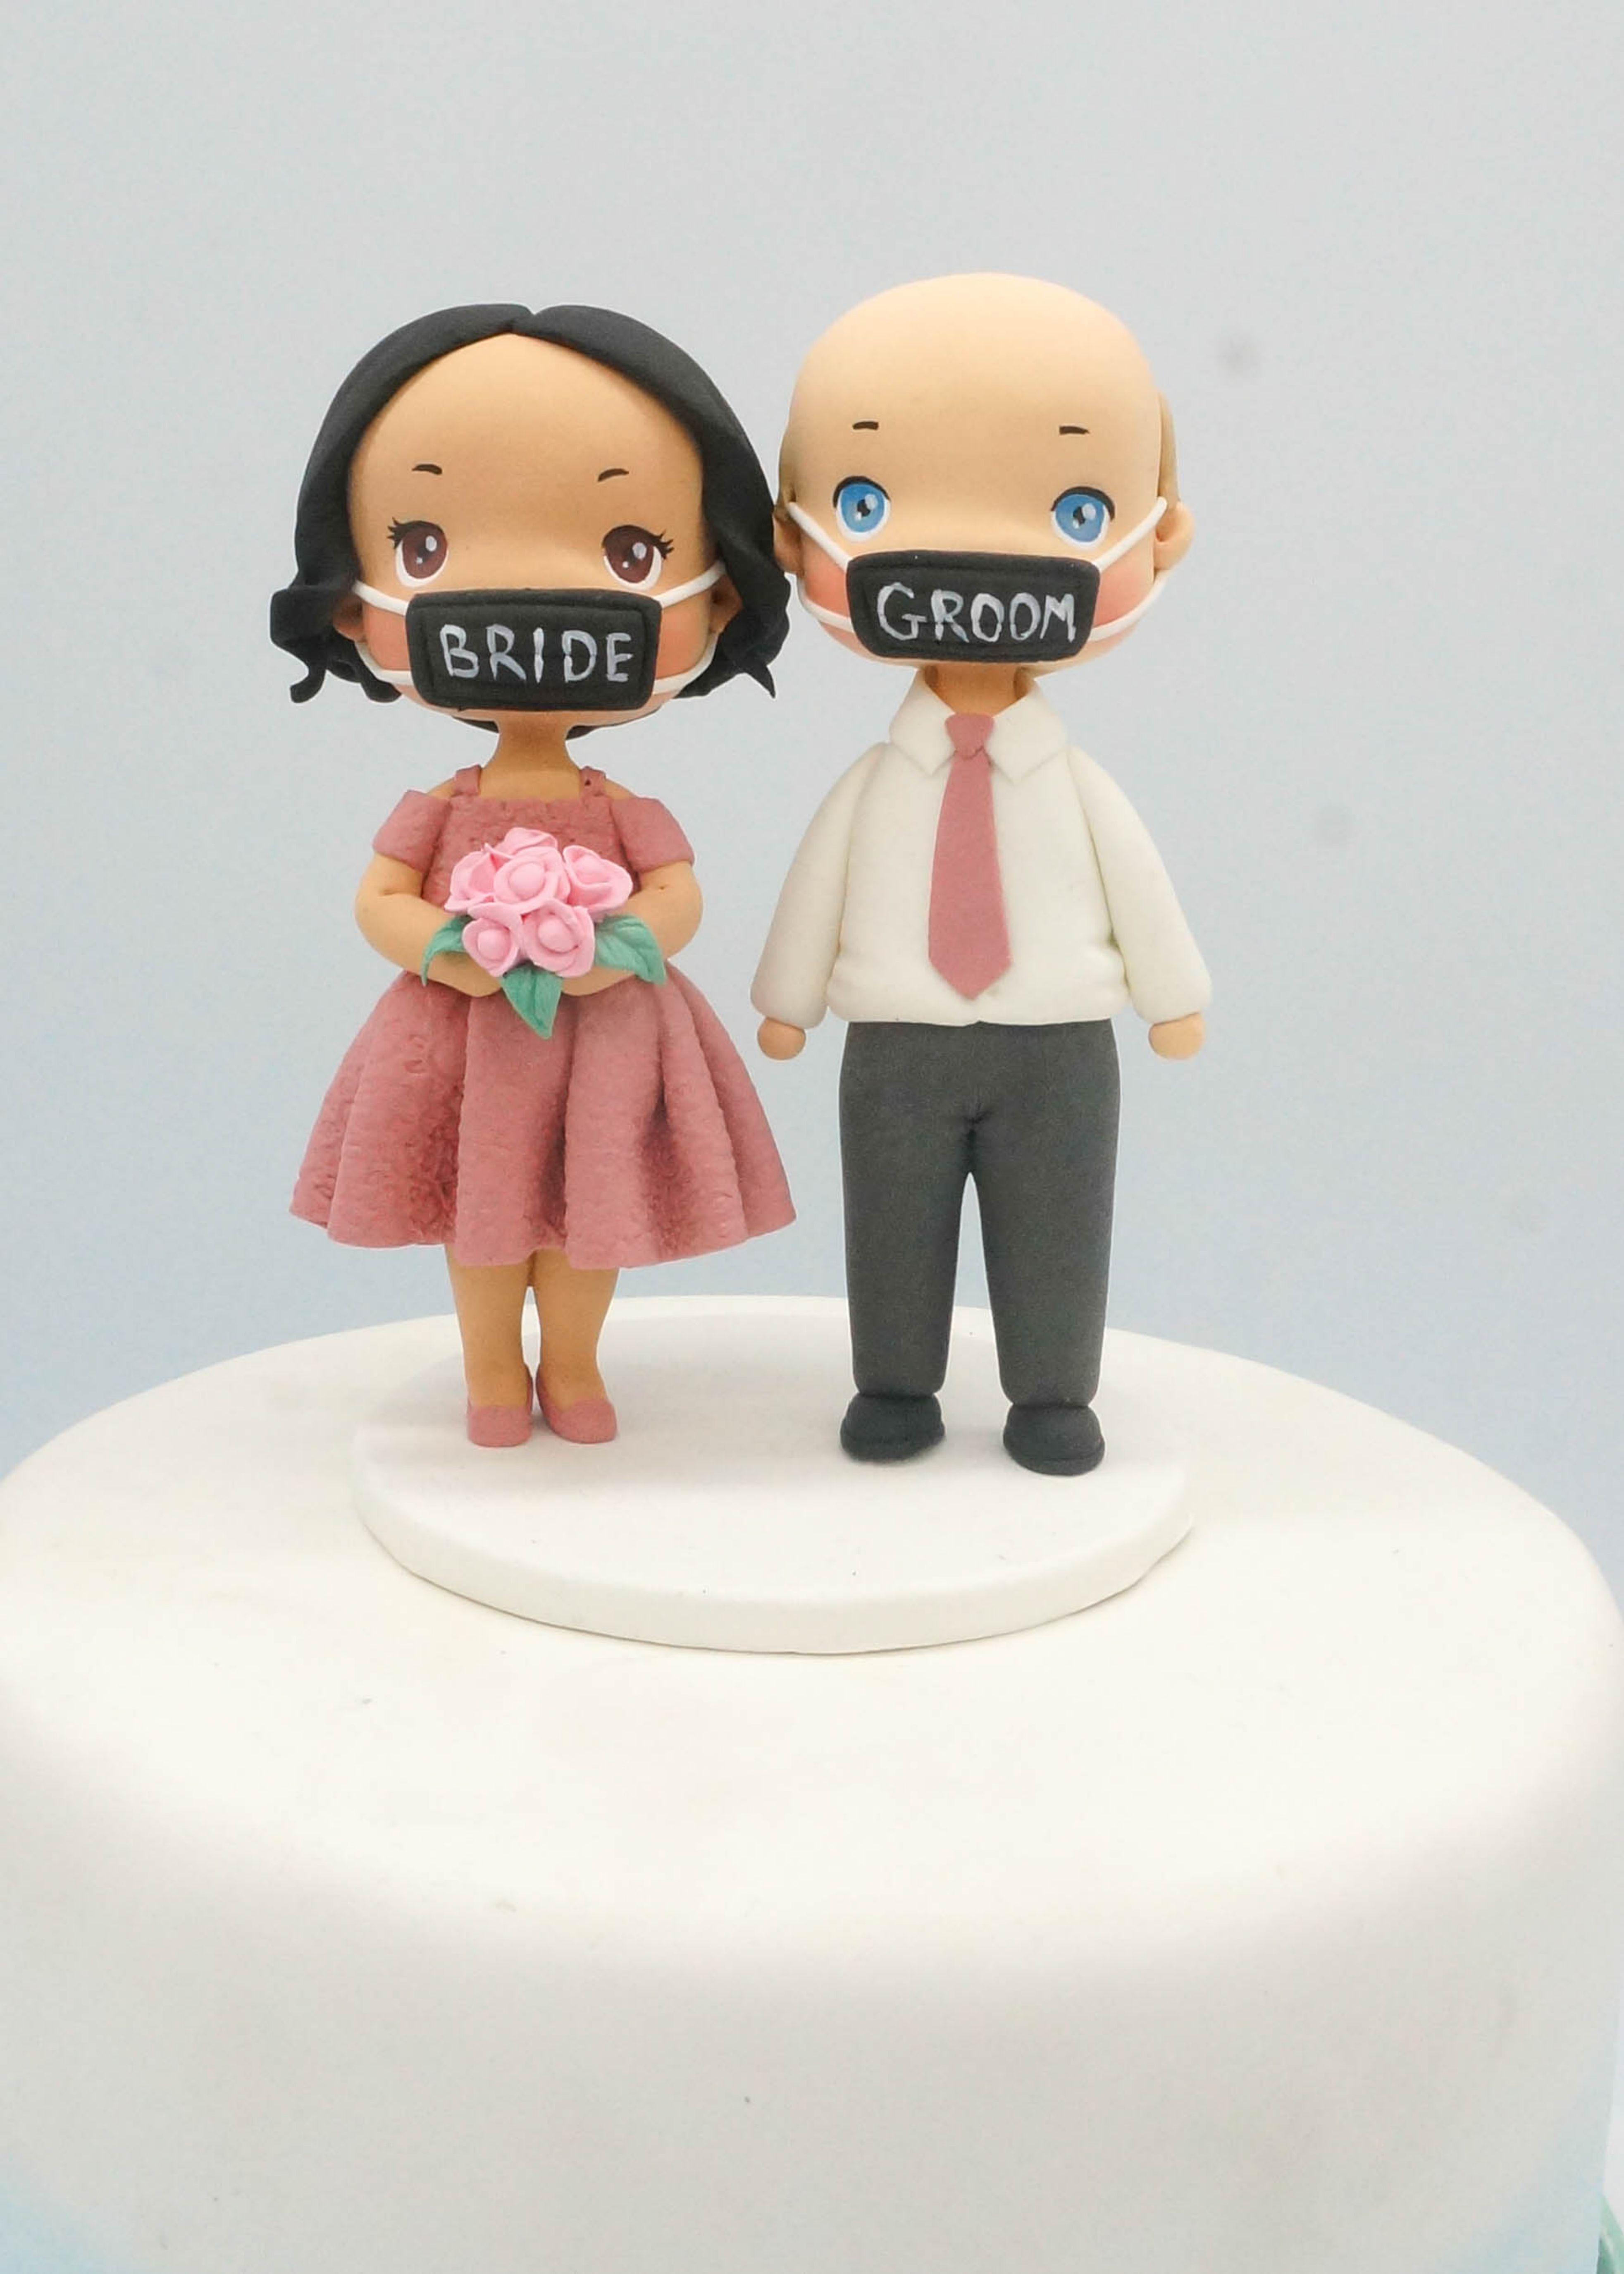 Picture of 10 Years Anniversary Wedding Cake Topper, Dusty Rose Wedding Theme